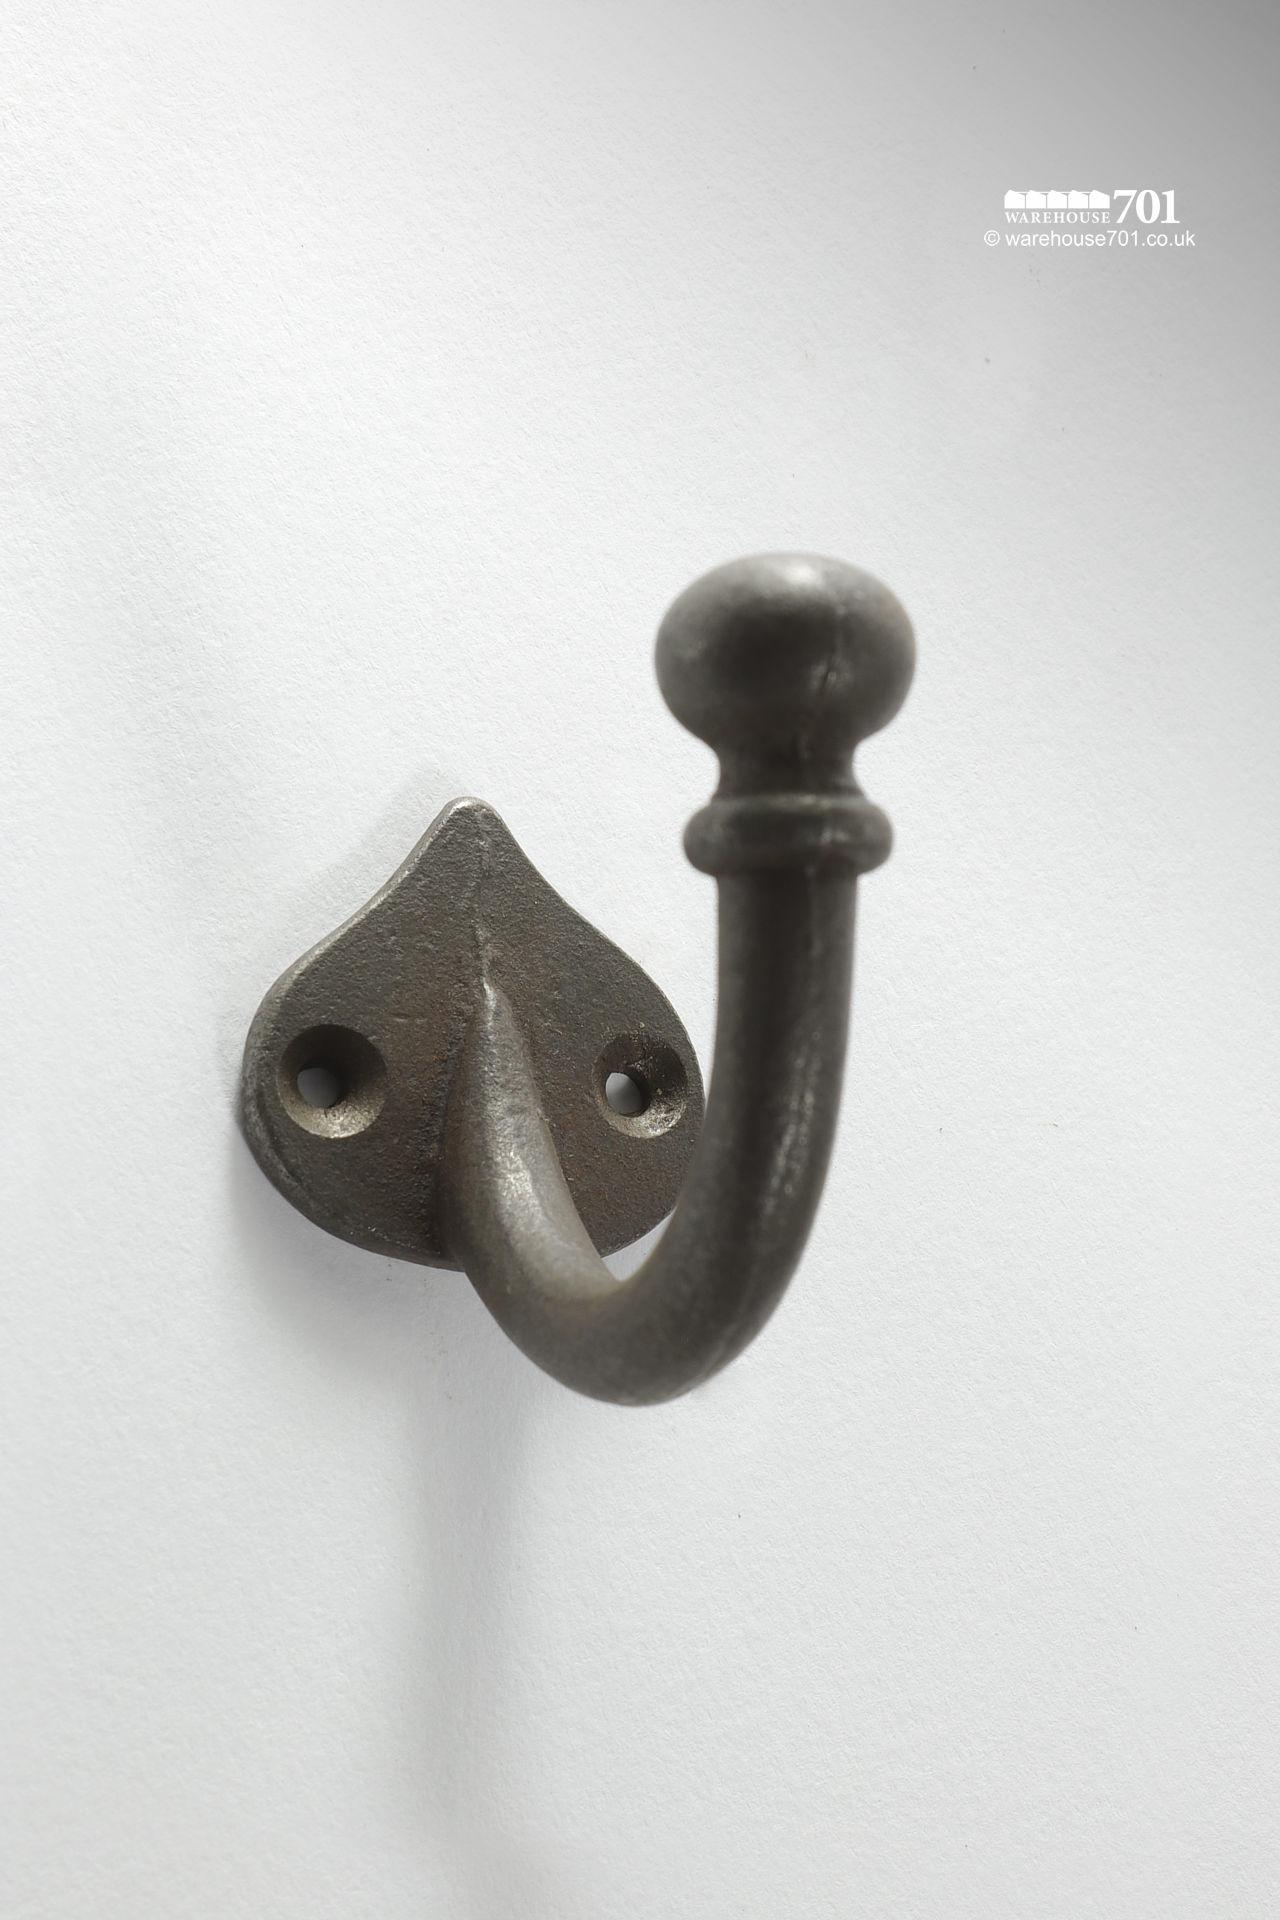 New Cast Iron Single Coat Hook with a Spearhead Shaped Base